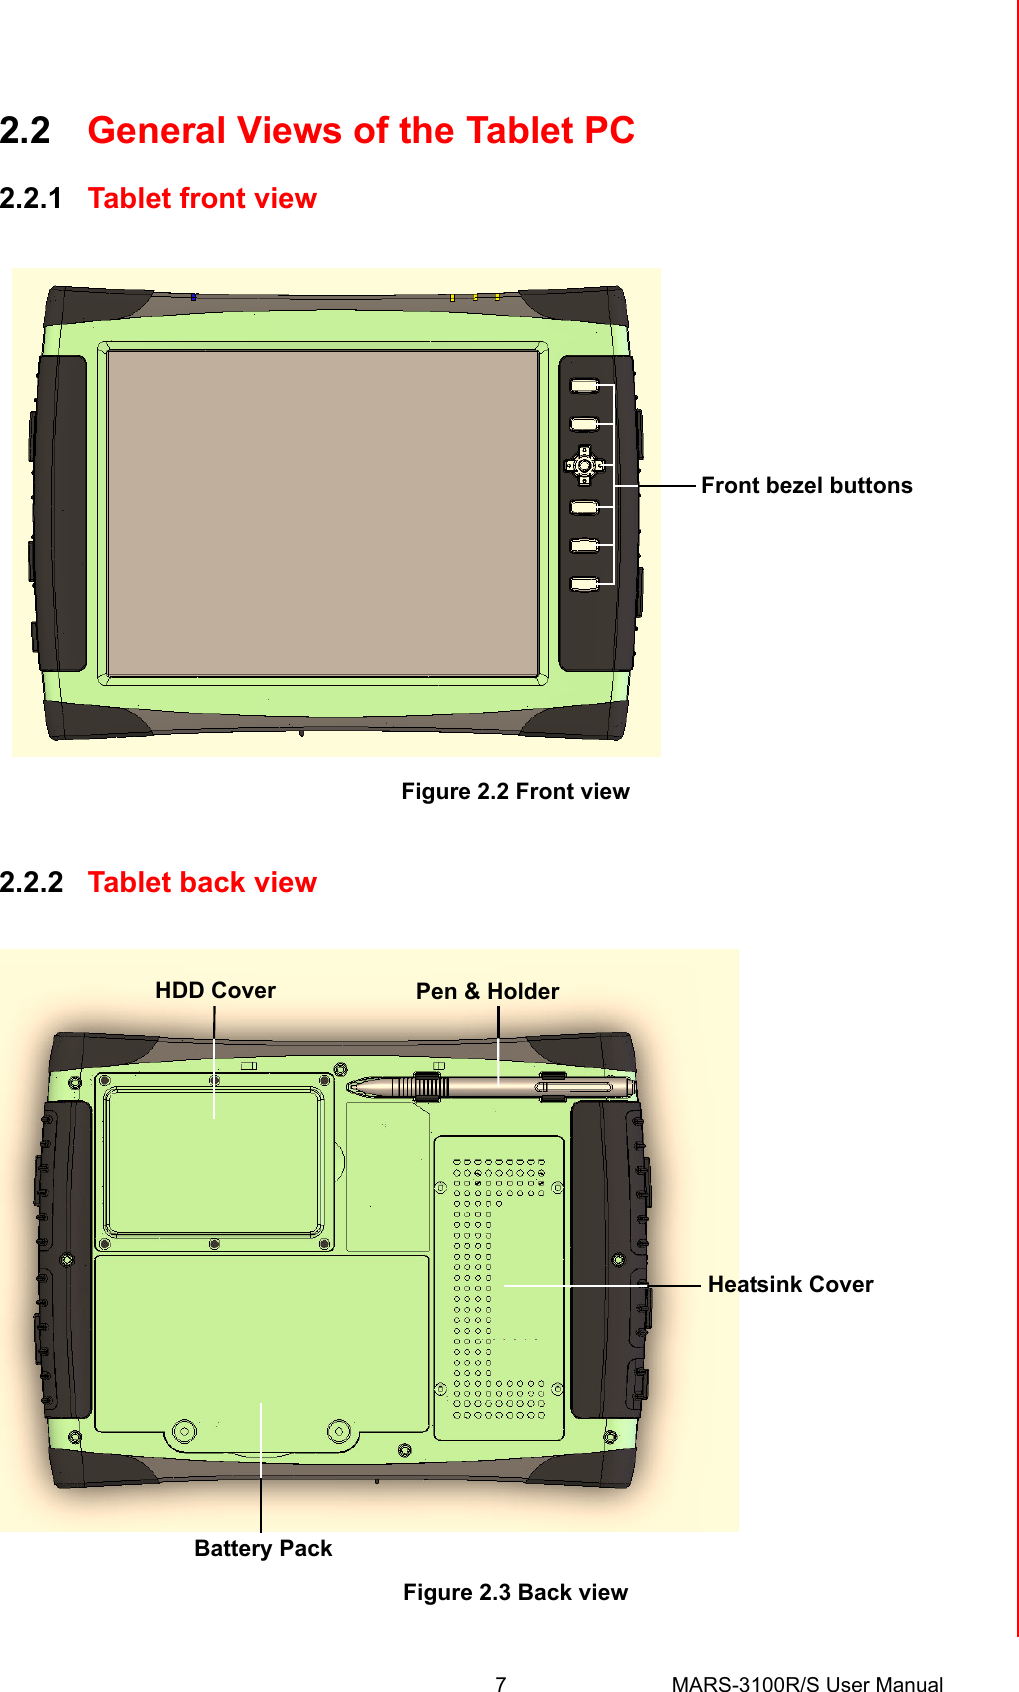 7 MARS-3100R/S User ManualChapter 2 Getting Started2.2 General Views of the Tablet PC2.2.1 Tablet front viewFigure 2.2 Front view2.2.2 Tablet back view Figure 2.3 Back viewFront bezel buttonsHeatsink CoverPen &amp; HolderBattery PackHDD Cover